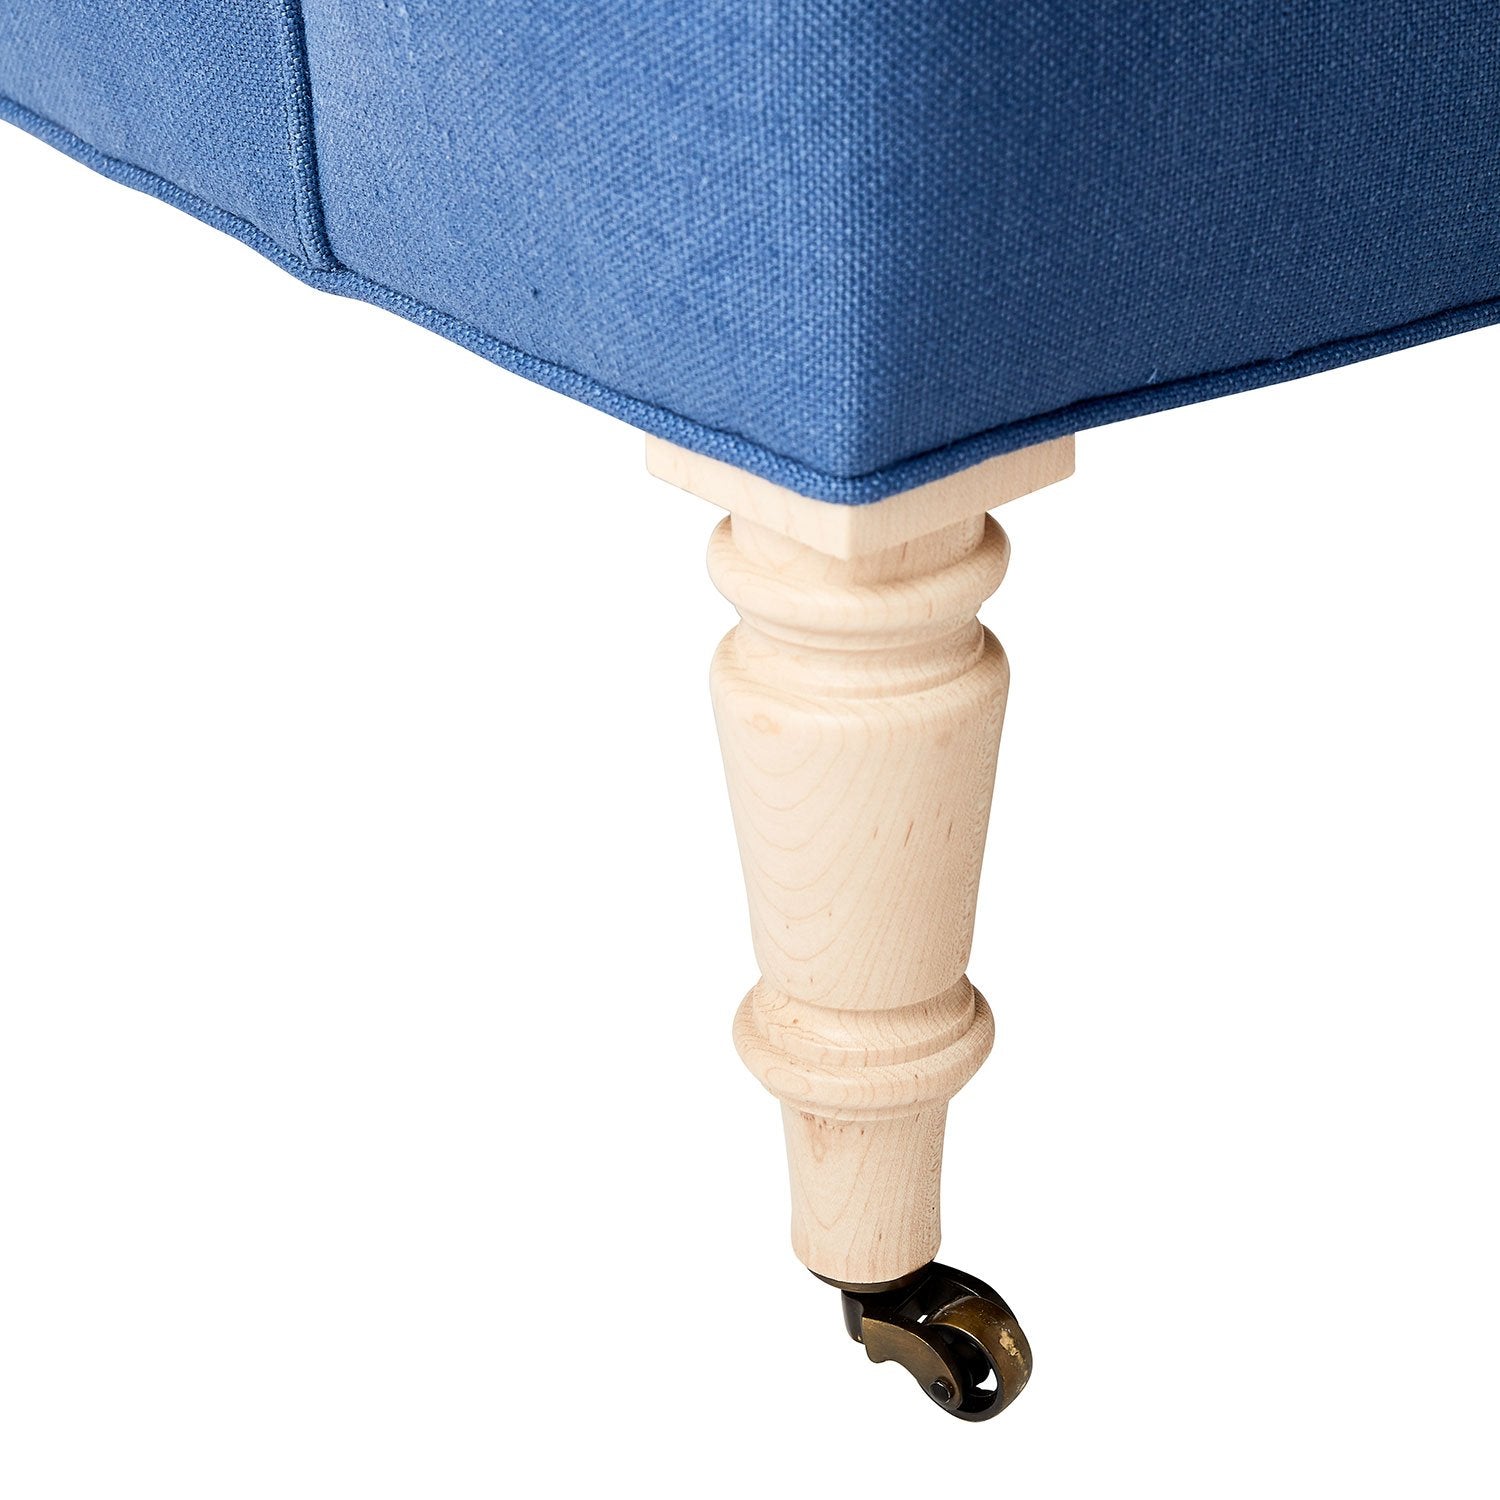 Wood Legs on Blueberry Blue Carter Chair with Wheels